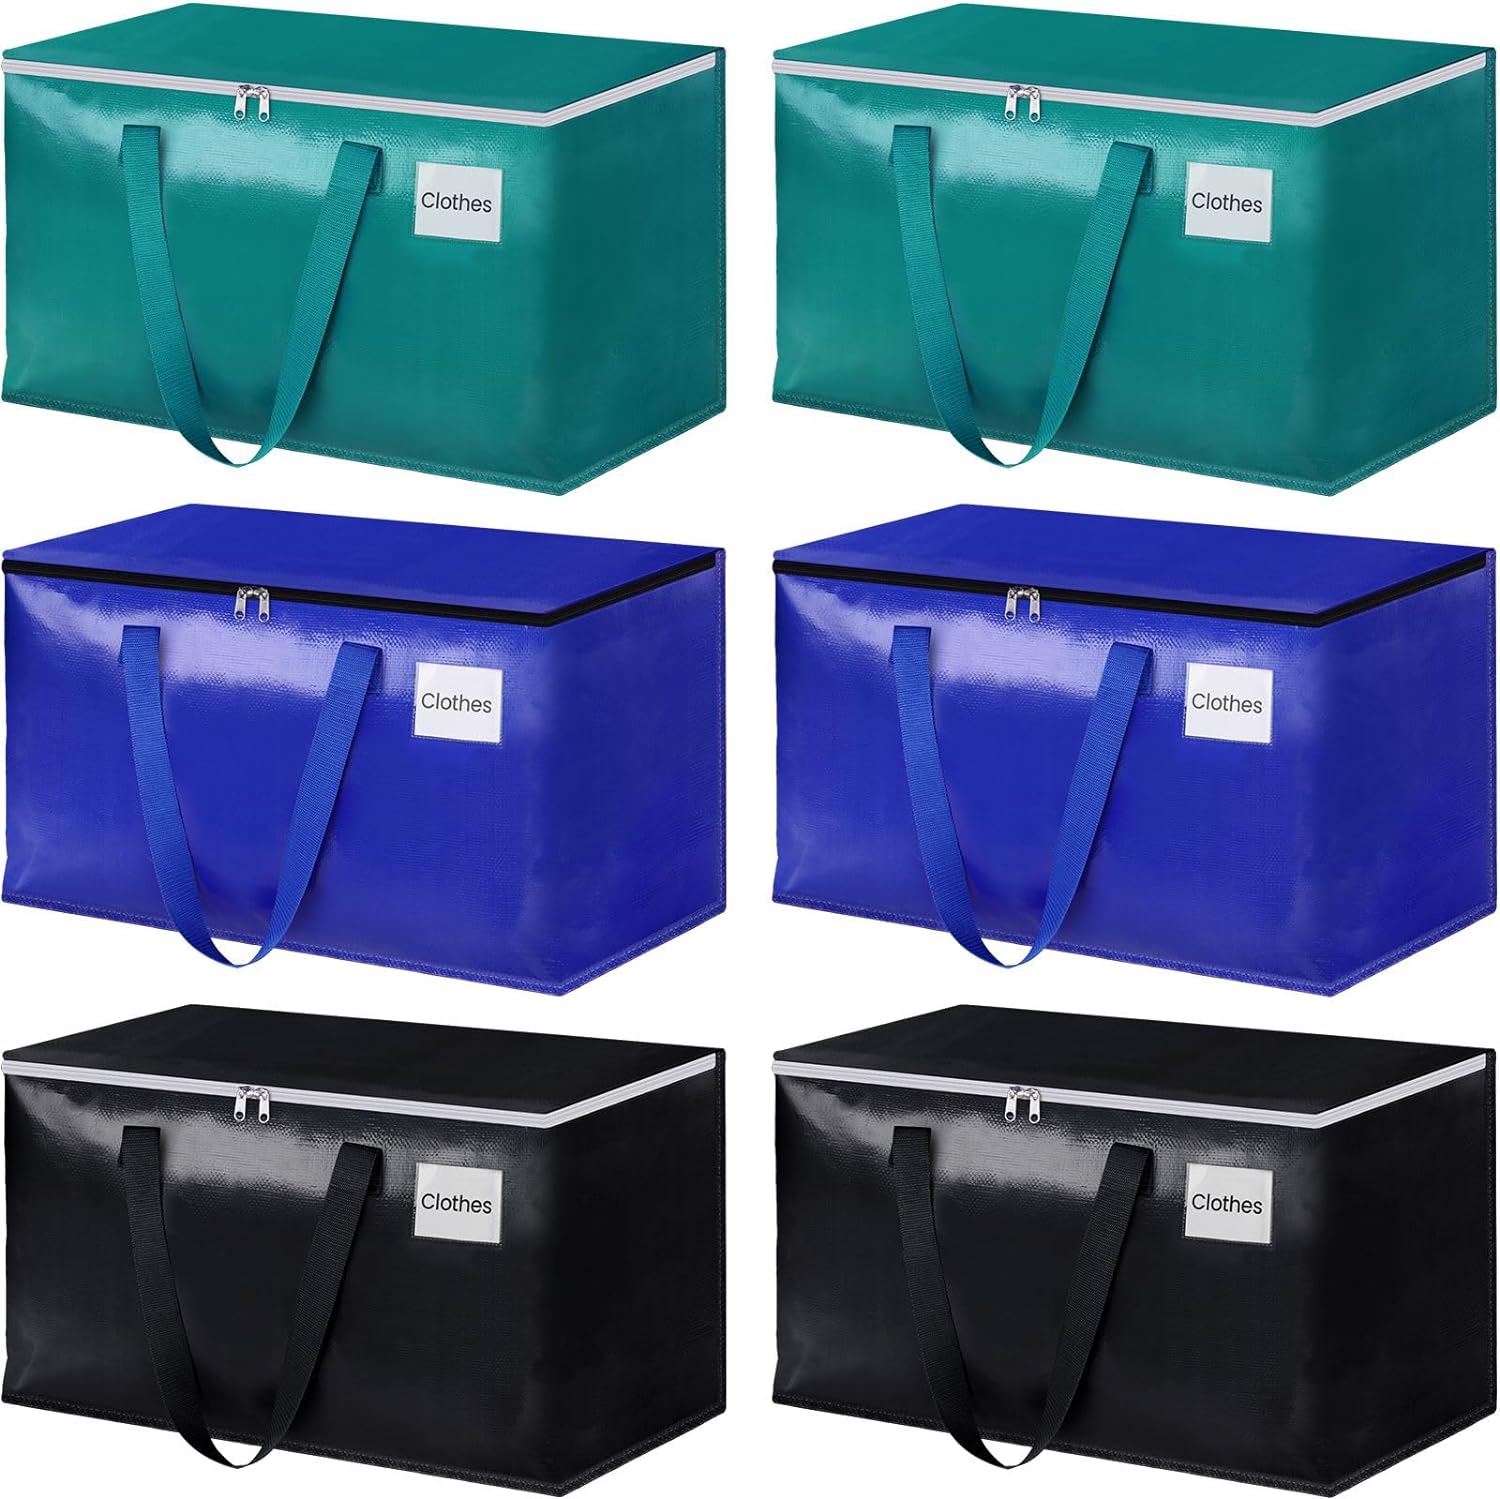 These are such a great buy. They are perfect for moving and storing. They are also foldable so I can keep the stored for future use. I have so many here and just recently moved and this was great help!